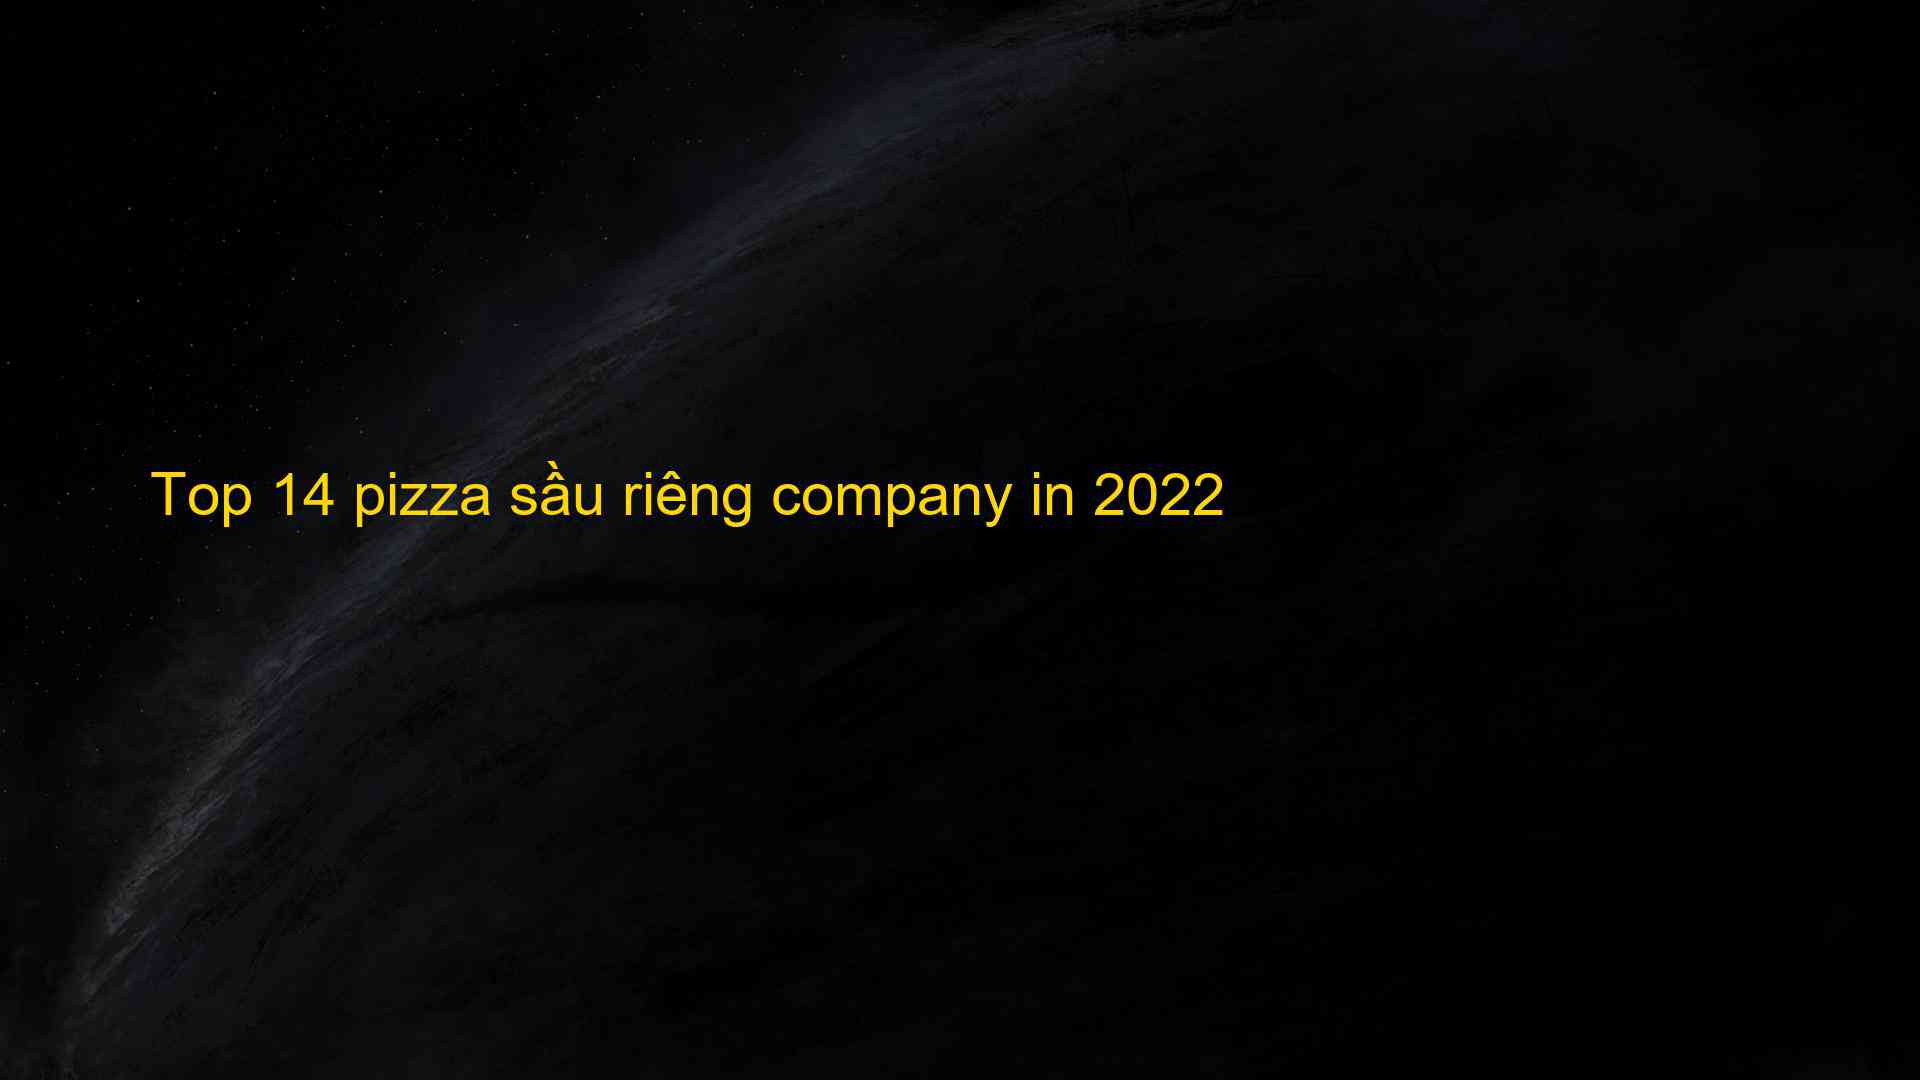 Top 14 pizza sau rieng company in 2022 1660111768